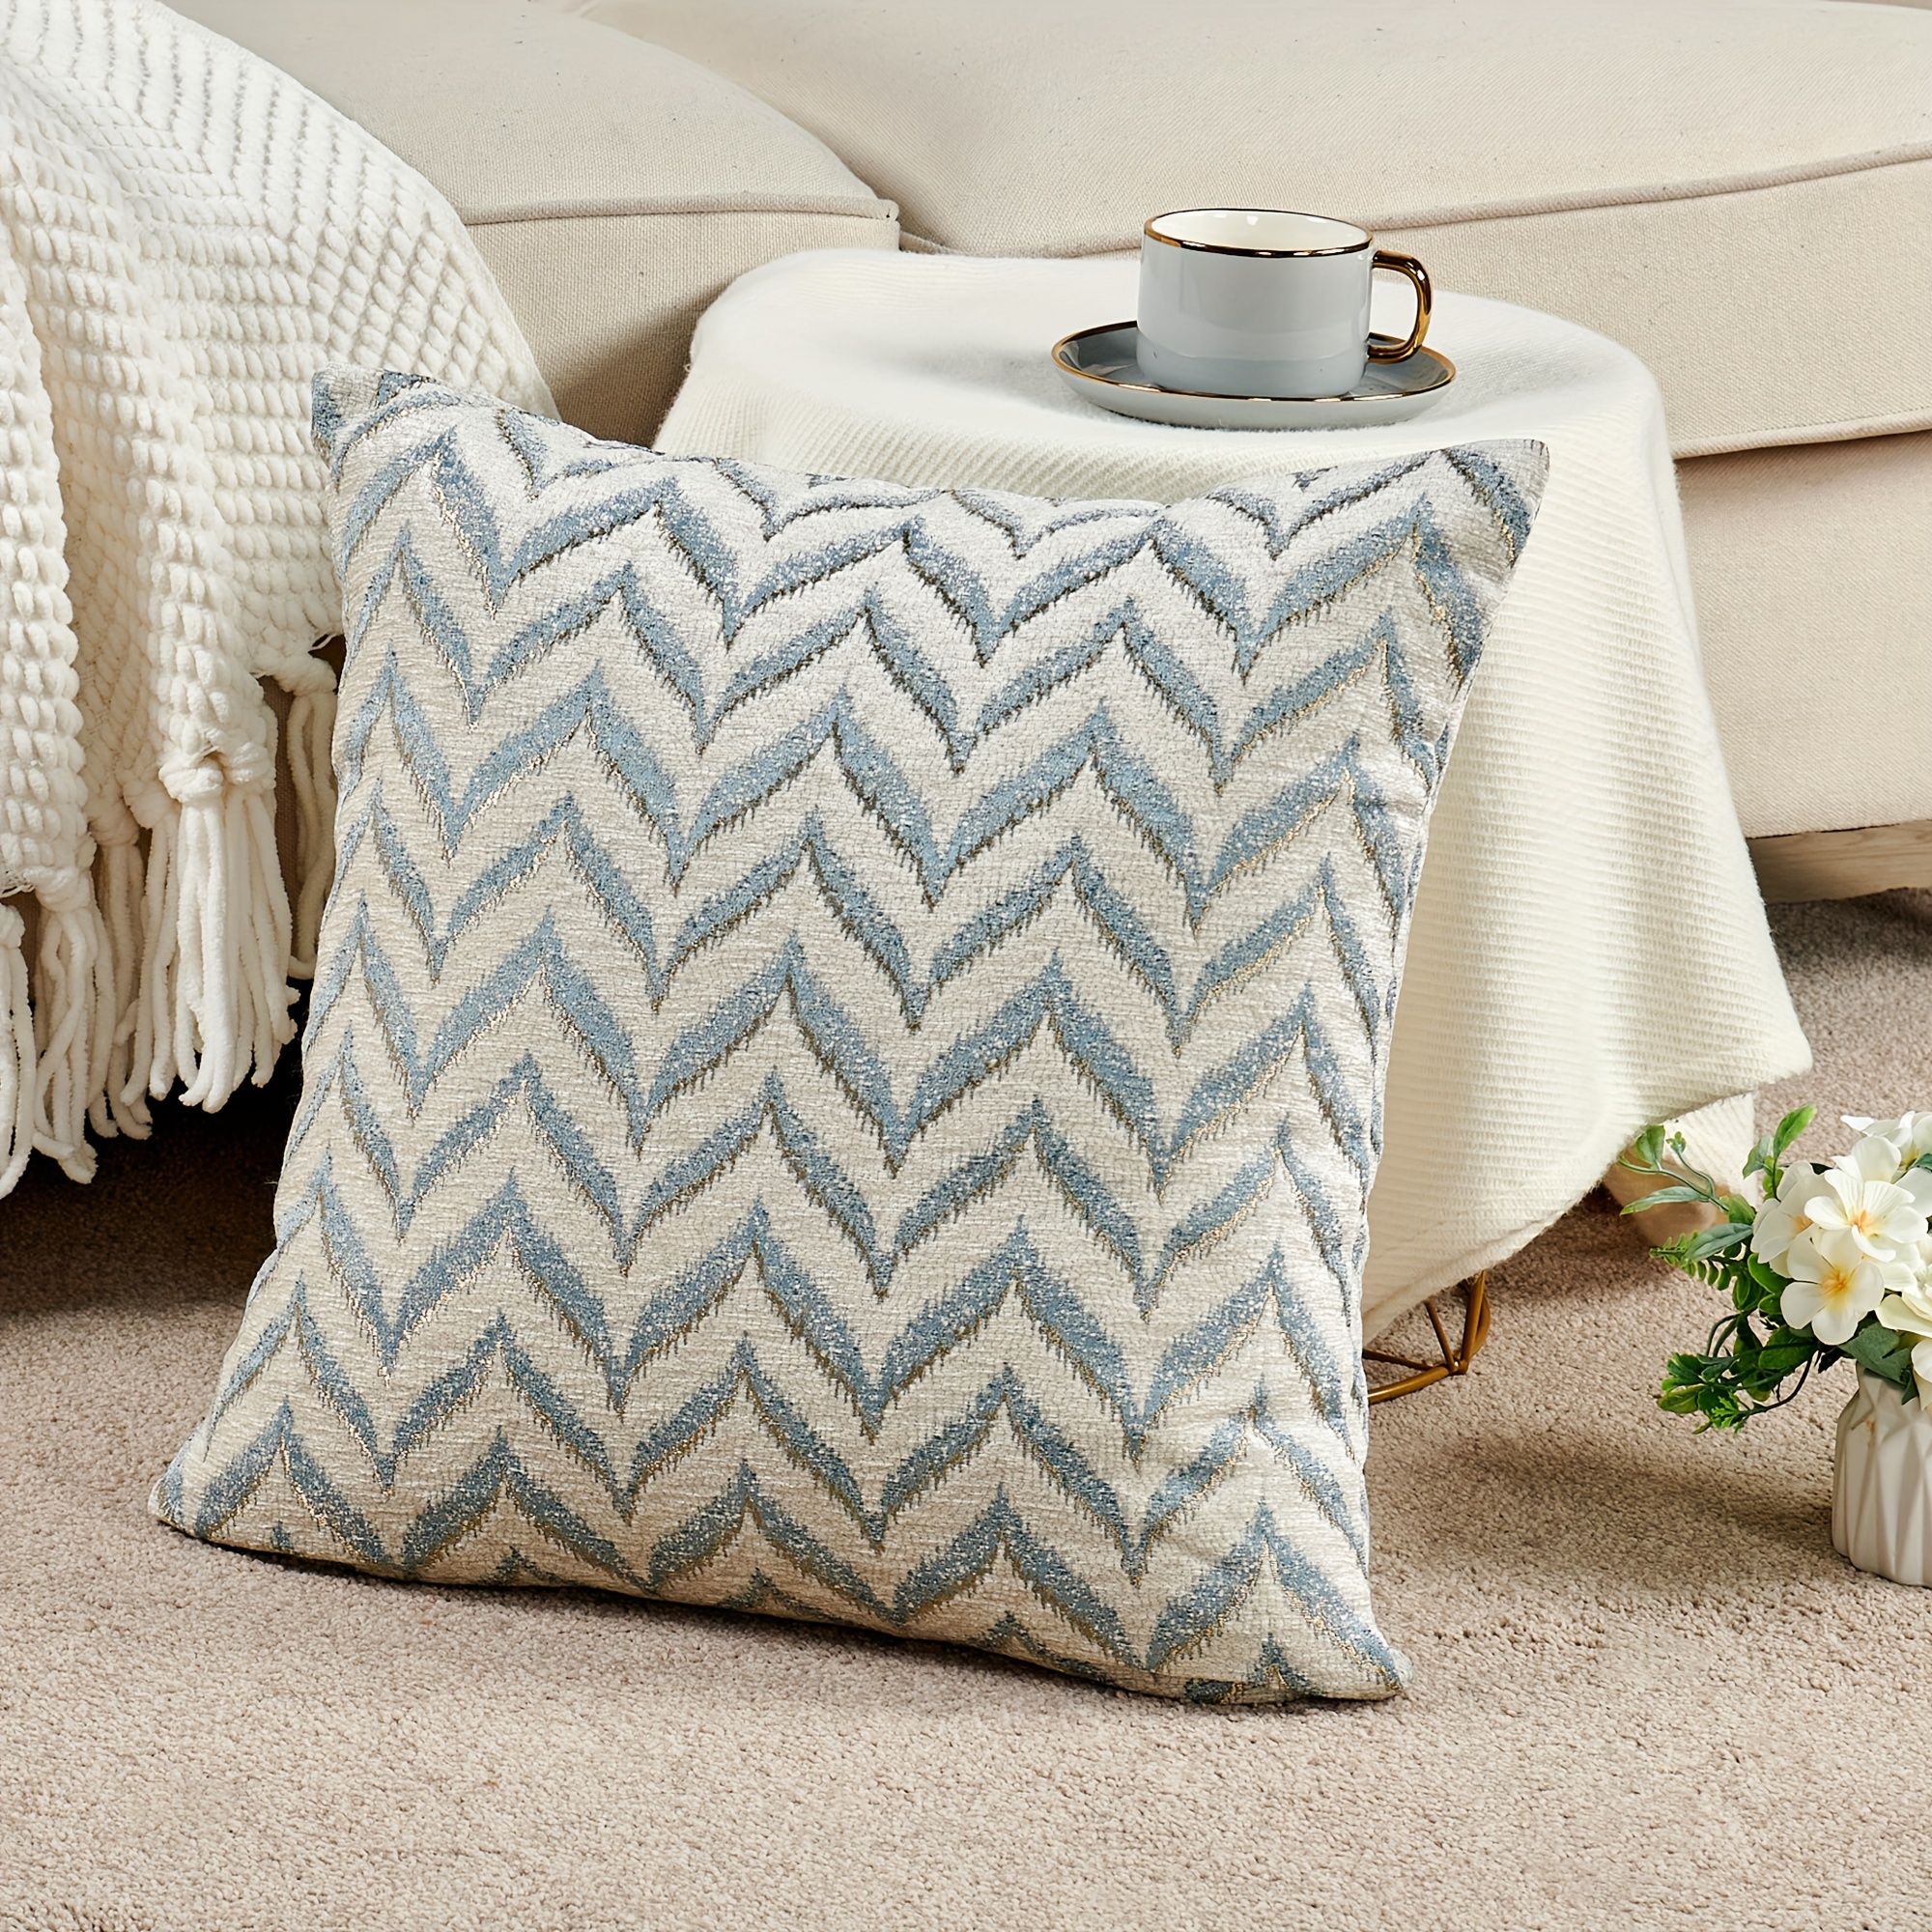 1pc Jacquard Chevron Pattern Chenille Soft Decorative Throw Pillow Cover with Lurex (NO INSERT), Stylish Cushion Cover for Sofa Couch Chair Living Room Bedroom Decor